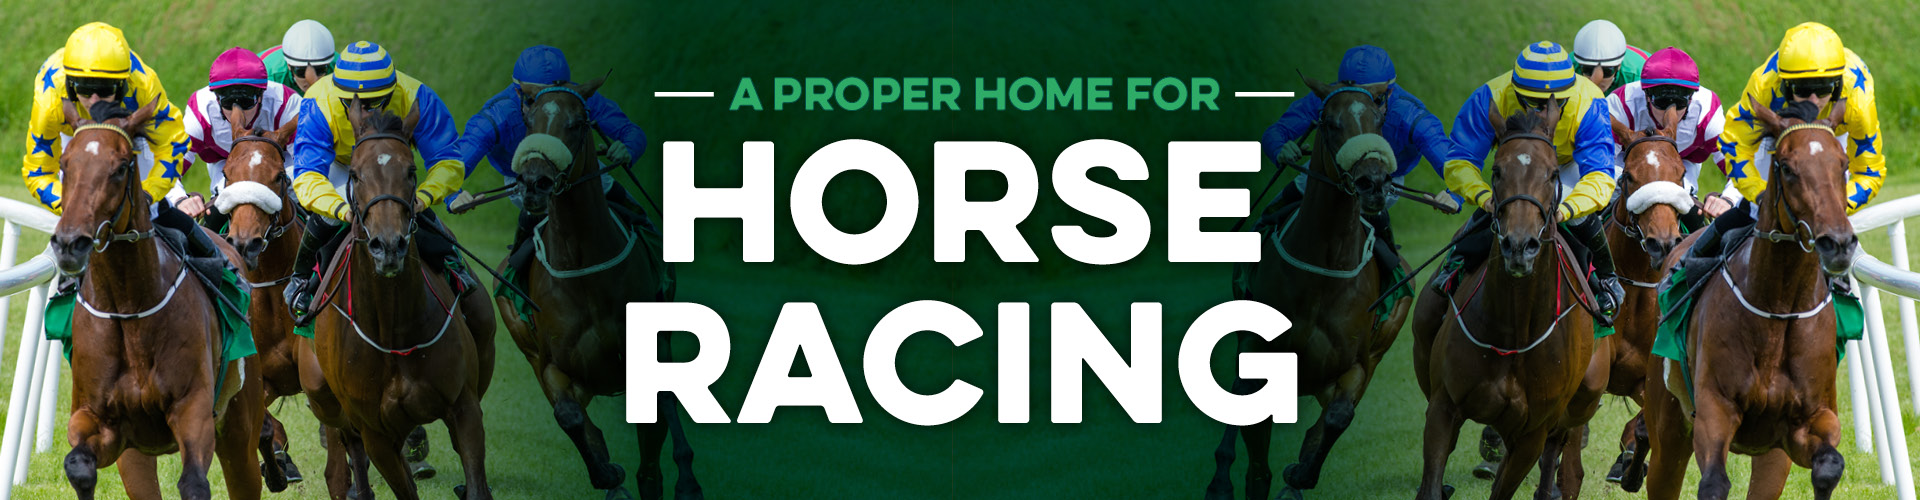 Watch horse racing live at The George pub